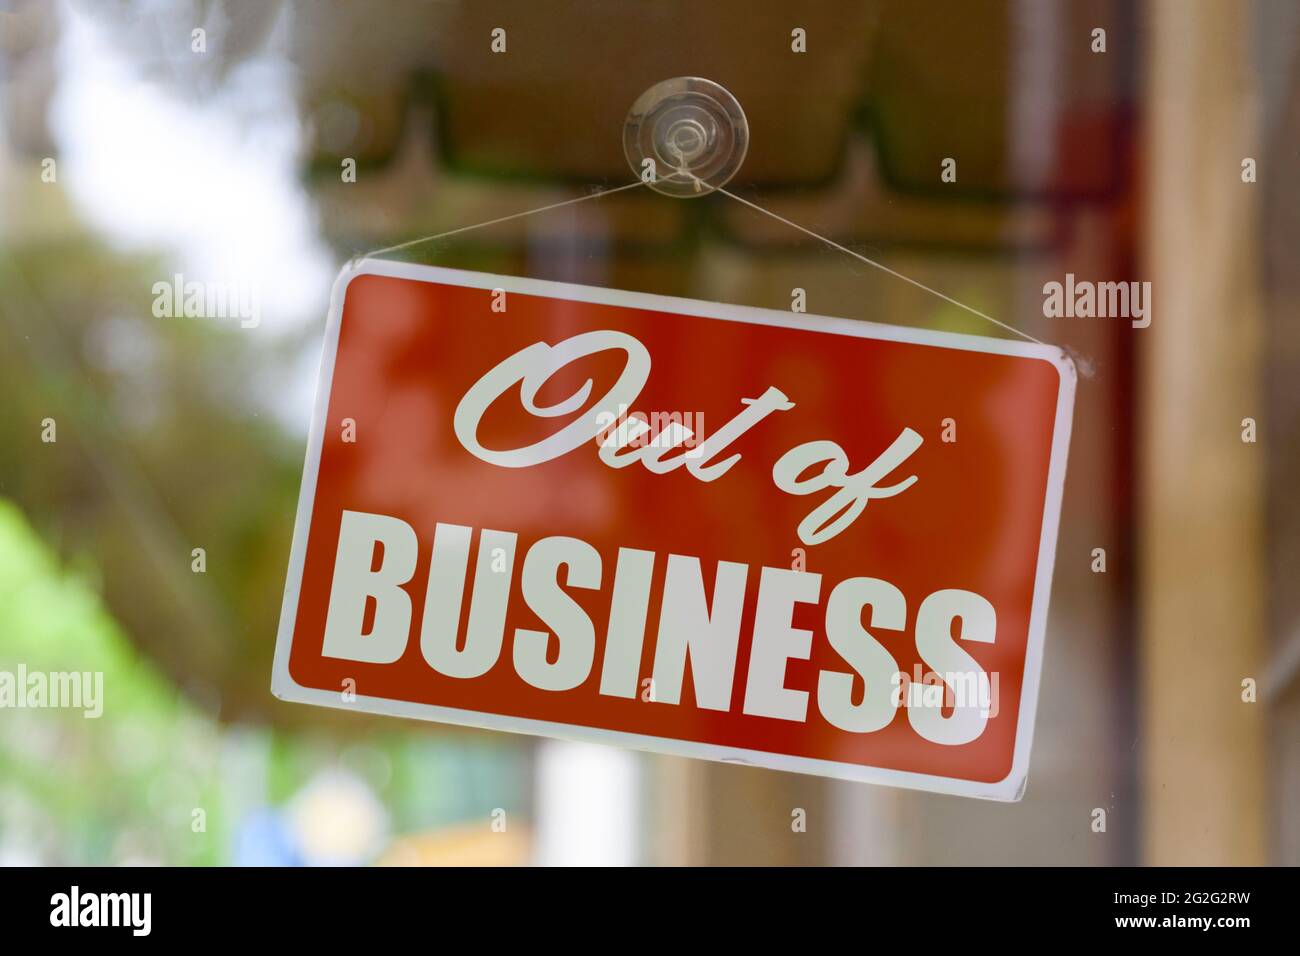 Close-up on a red sign in the window of a shop displaying the message: Out of business. Stock Photo